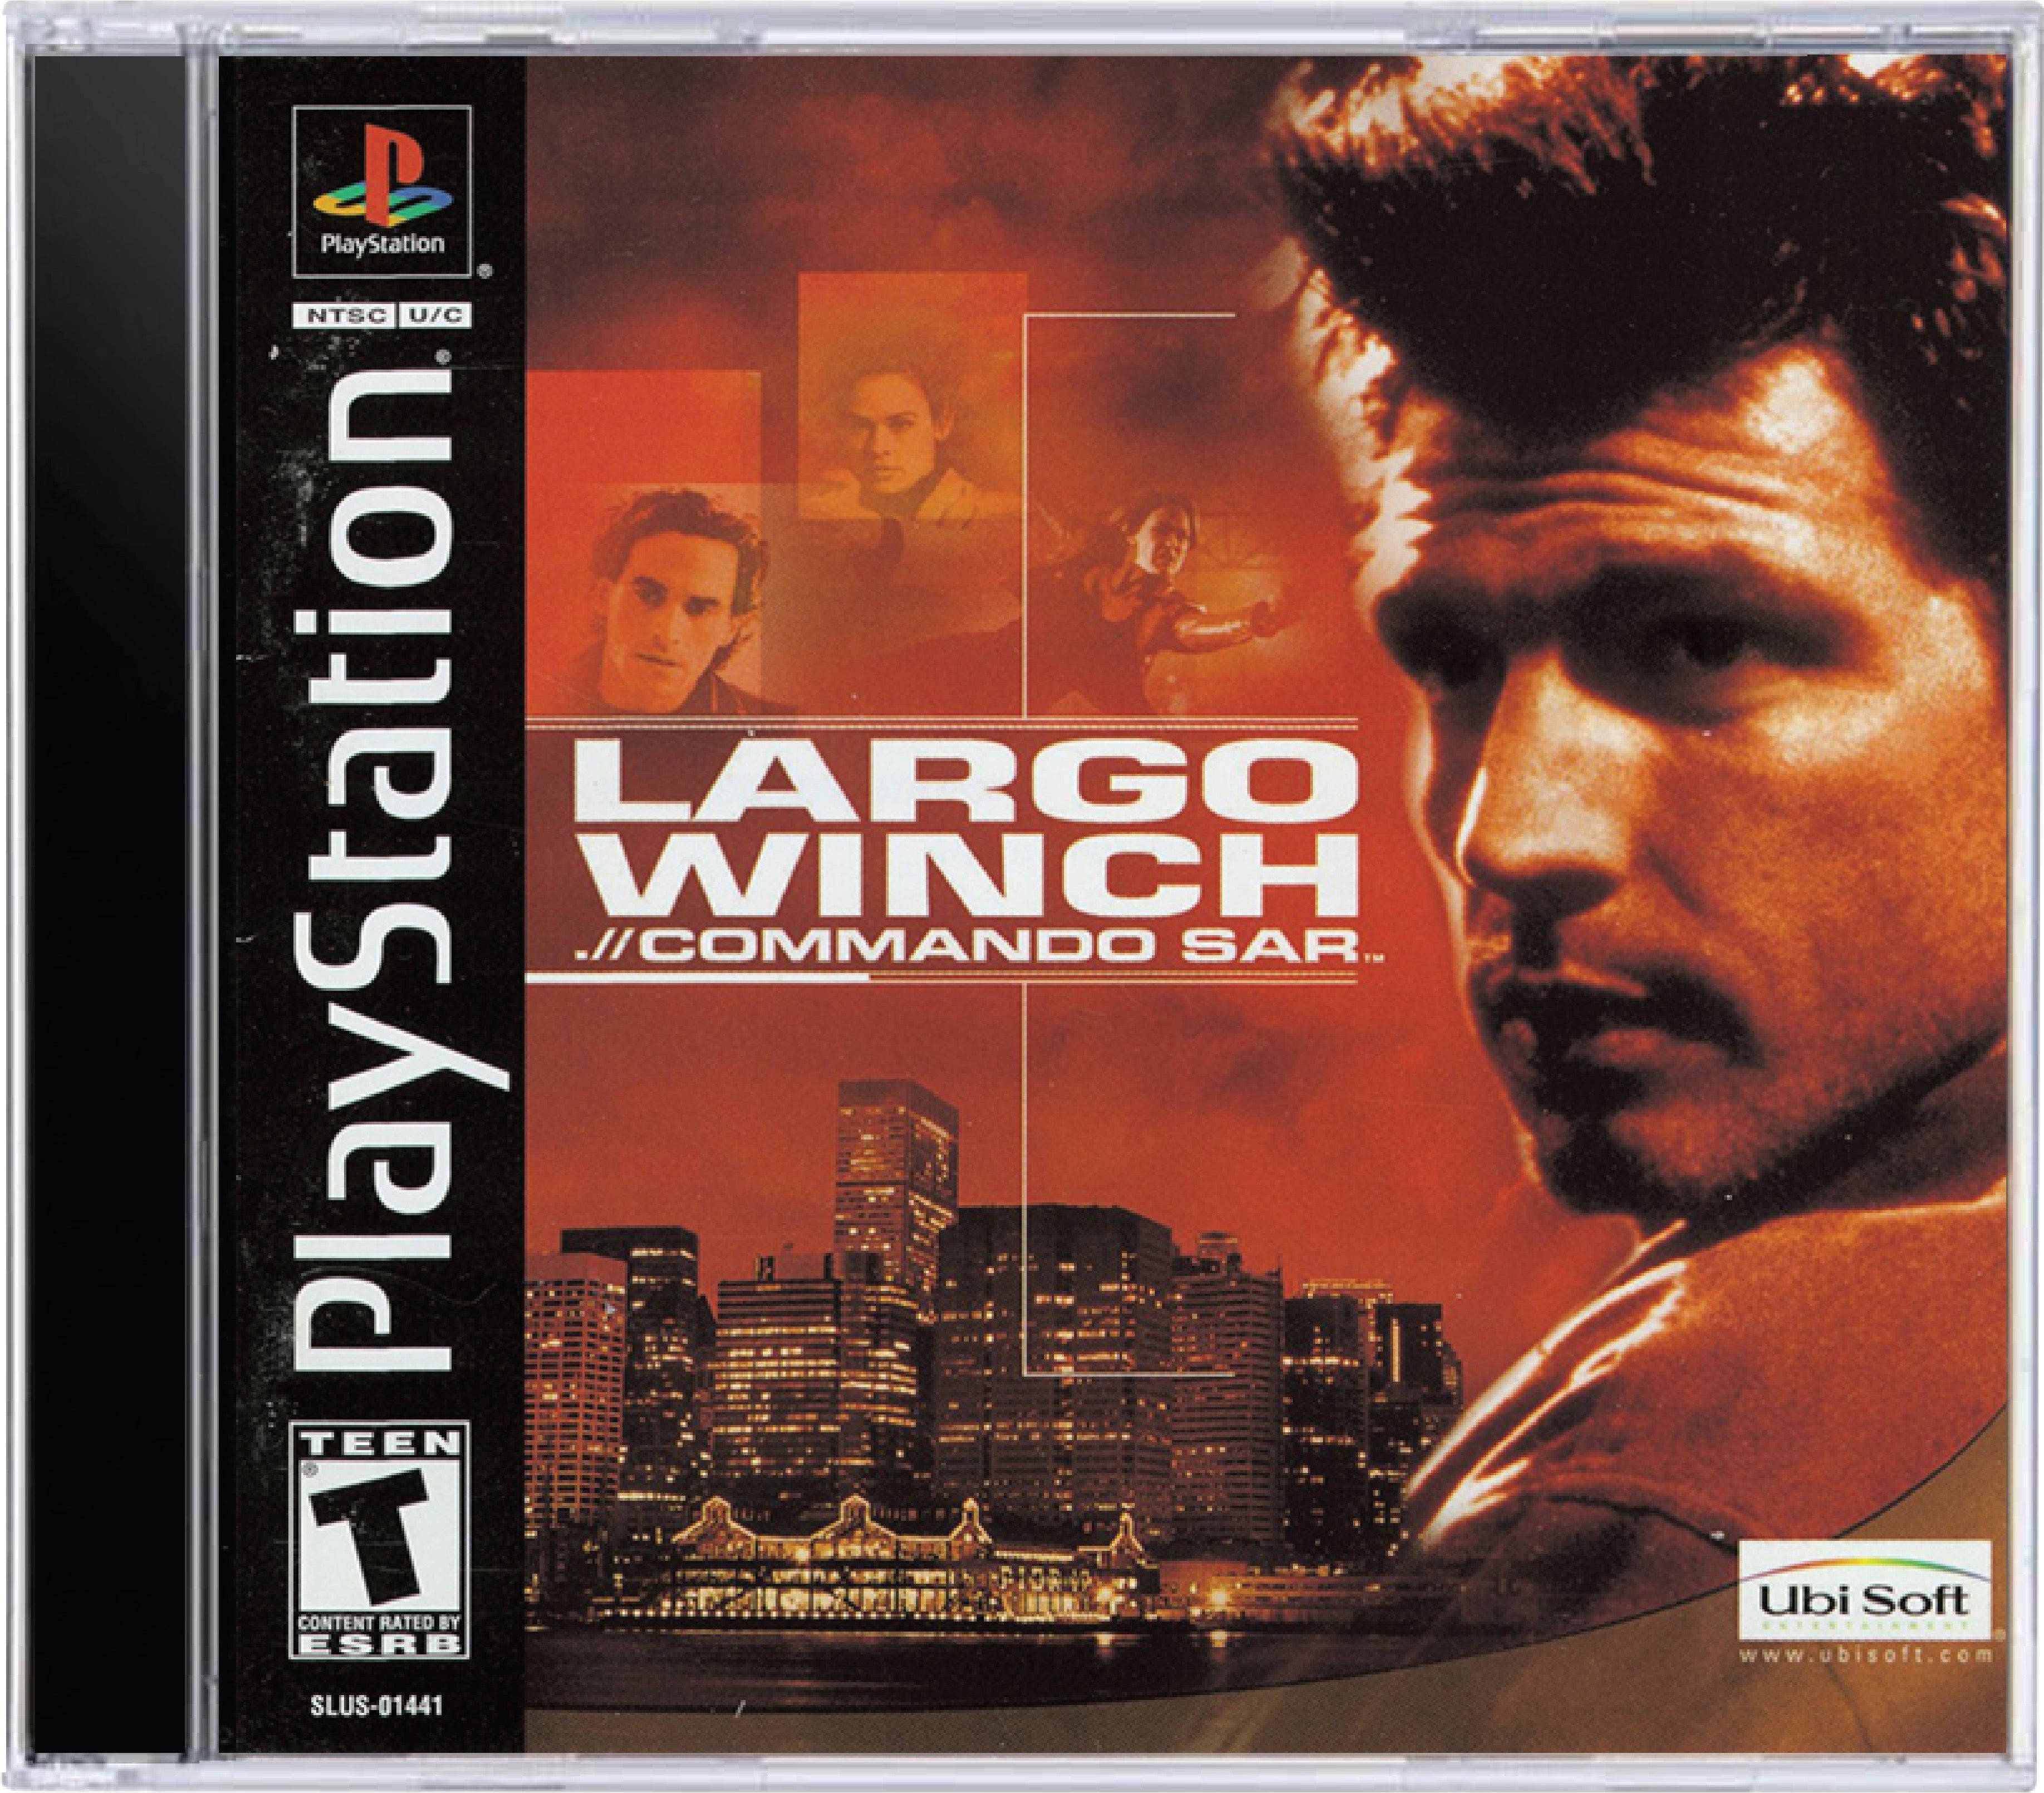 Largo Winch Cover Art and Product Photo